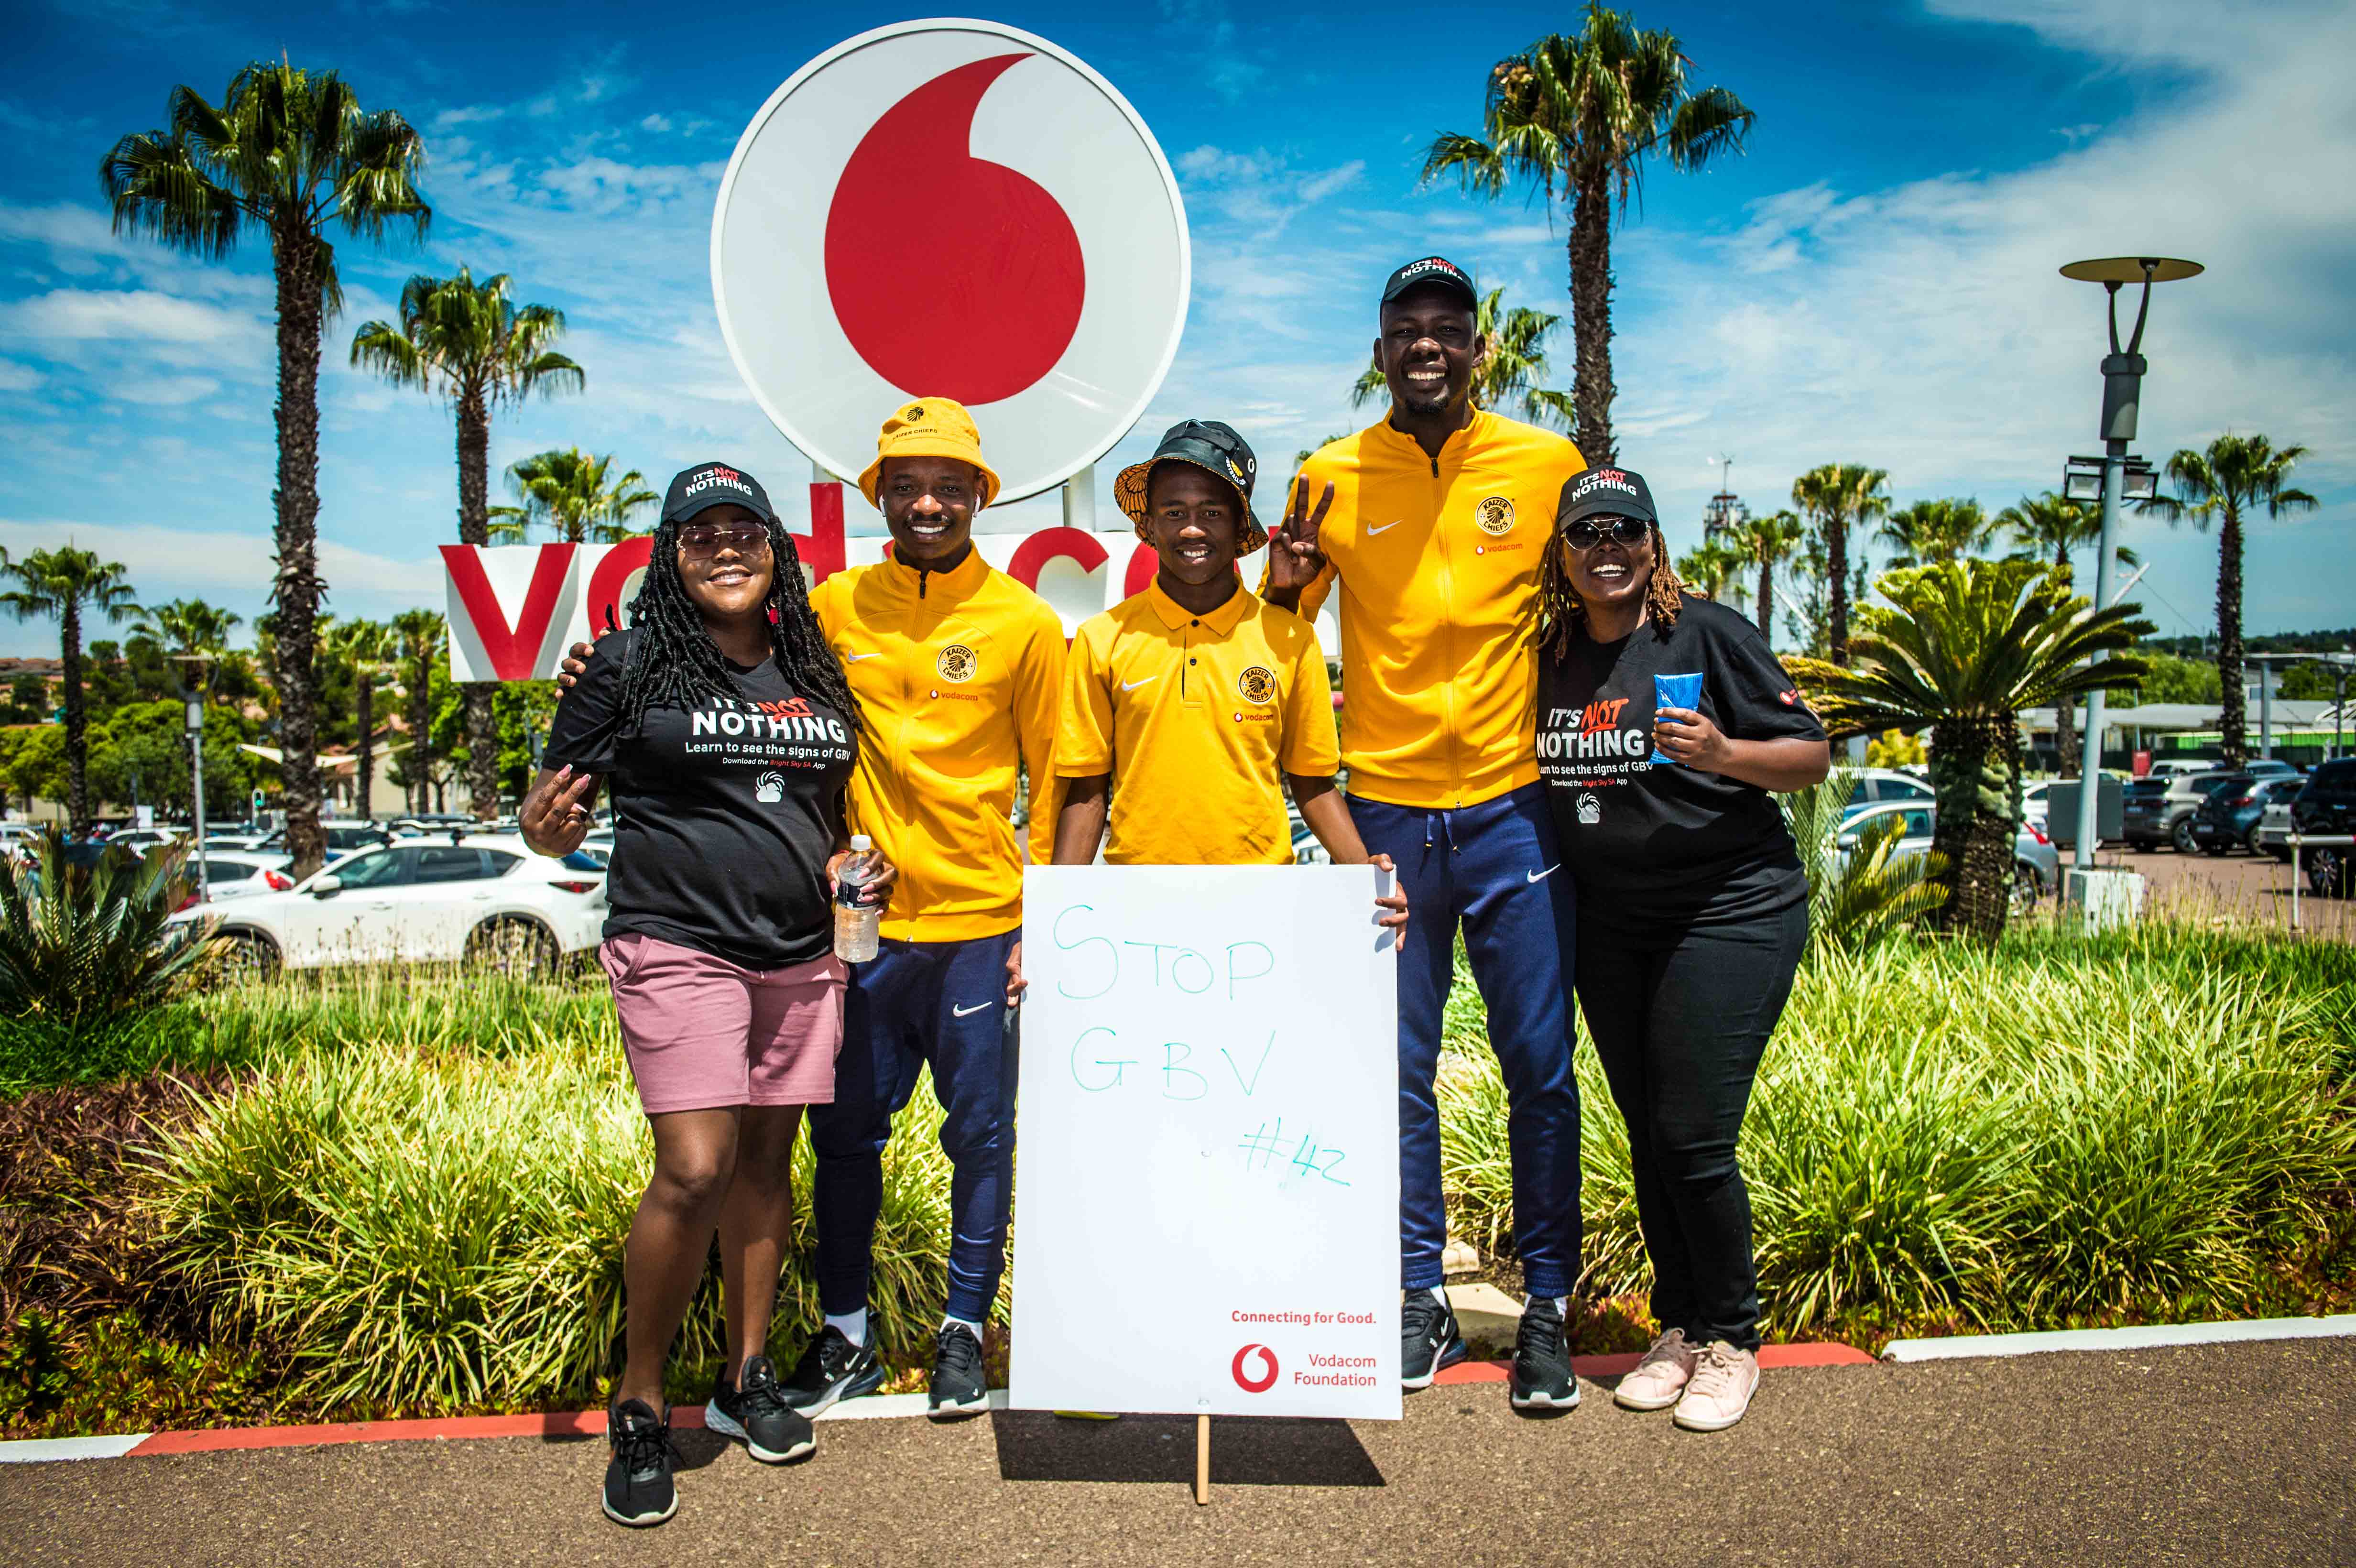 On Wednesday 7 December, more than 20 Kaizer Chiefs players from the First Team and Reserve Team squads took part in a walk organised by the Vodacom Foundation